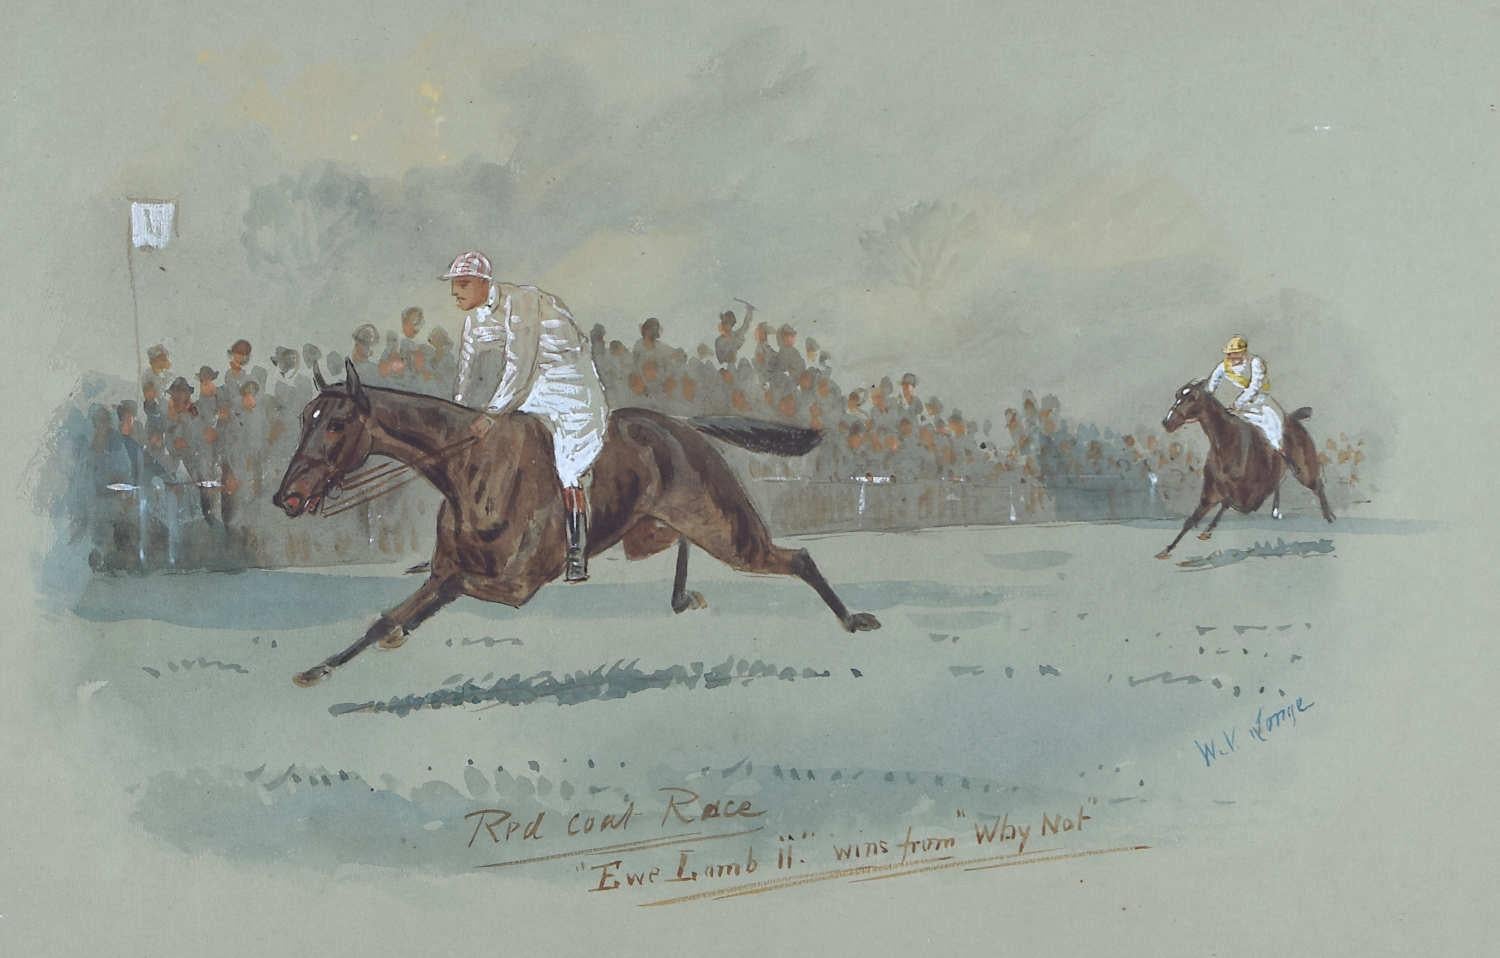 William Verner Longe (1857-1924)
Cottenham, December 1904
Watercolour
29 x 45 cm

Signed and inscribed 'Red Coat Race, "Ewe Lamb ii" wins from "Why Not"'.

A lively racing scene by William Verner Longe, and English artist noted for his scenes of